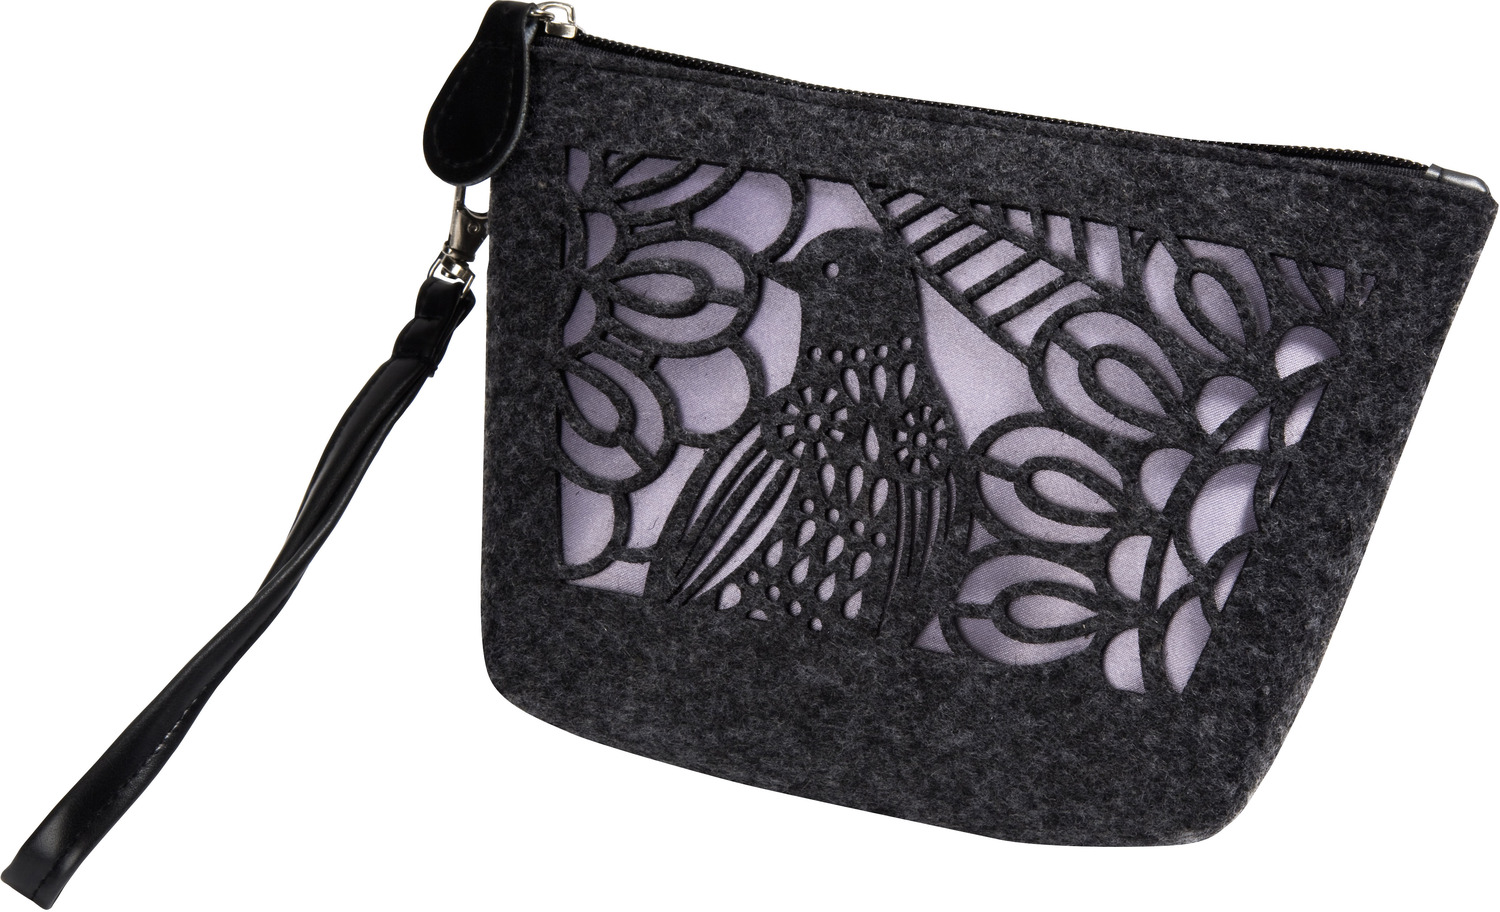 Charcoal and Lavender by H2Z Felt Accessories - Charcoal and Lavender - 8" x 2.5" x 5" Bag/Wristlet